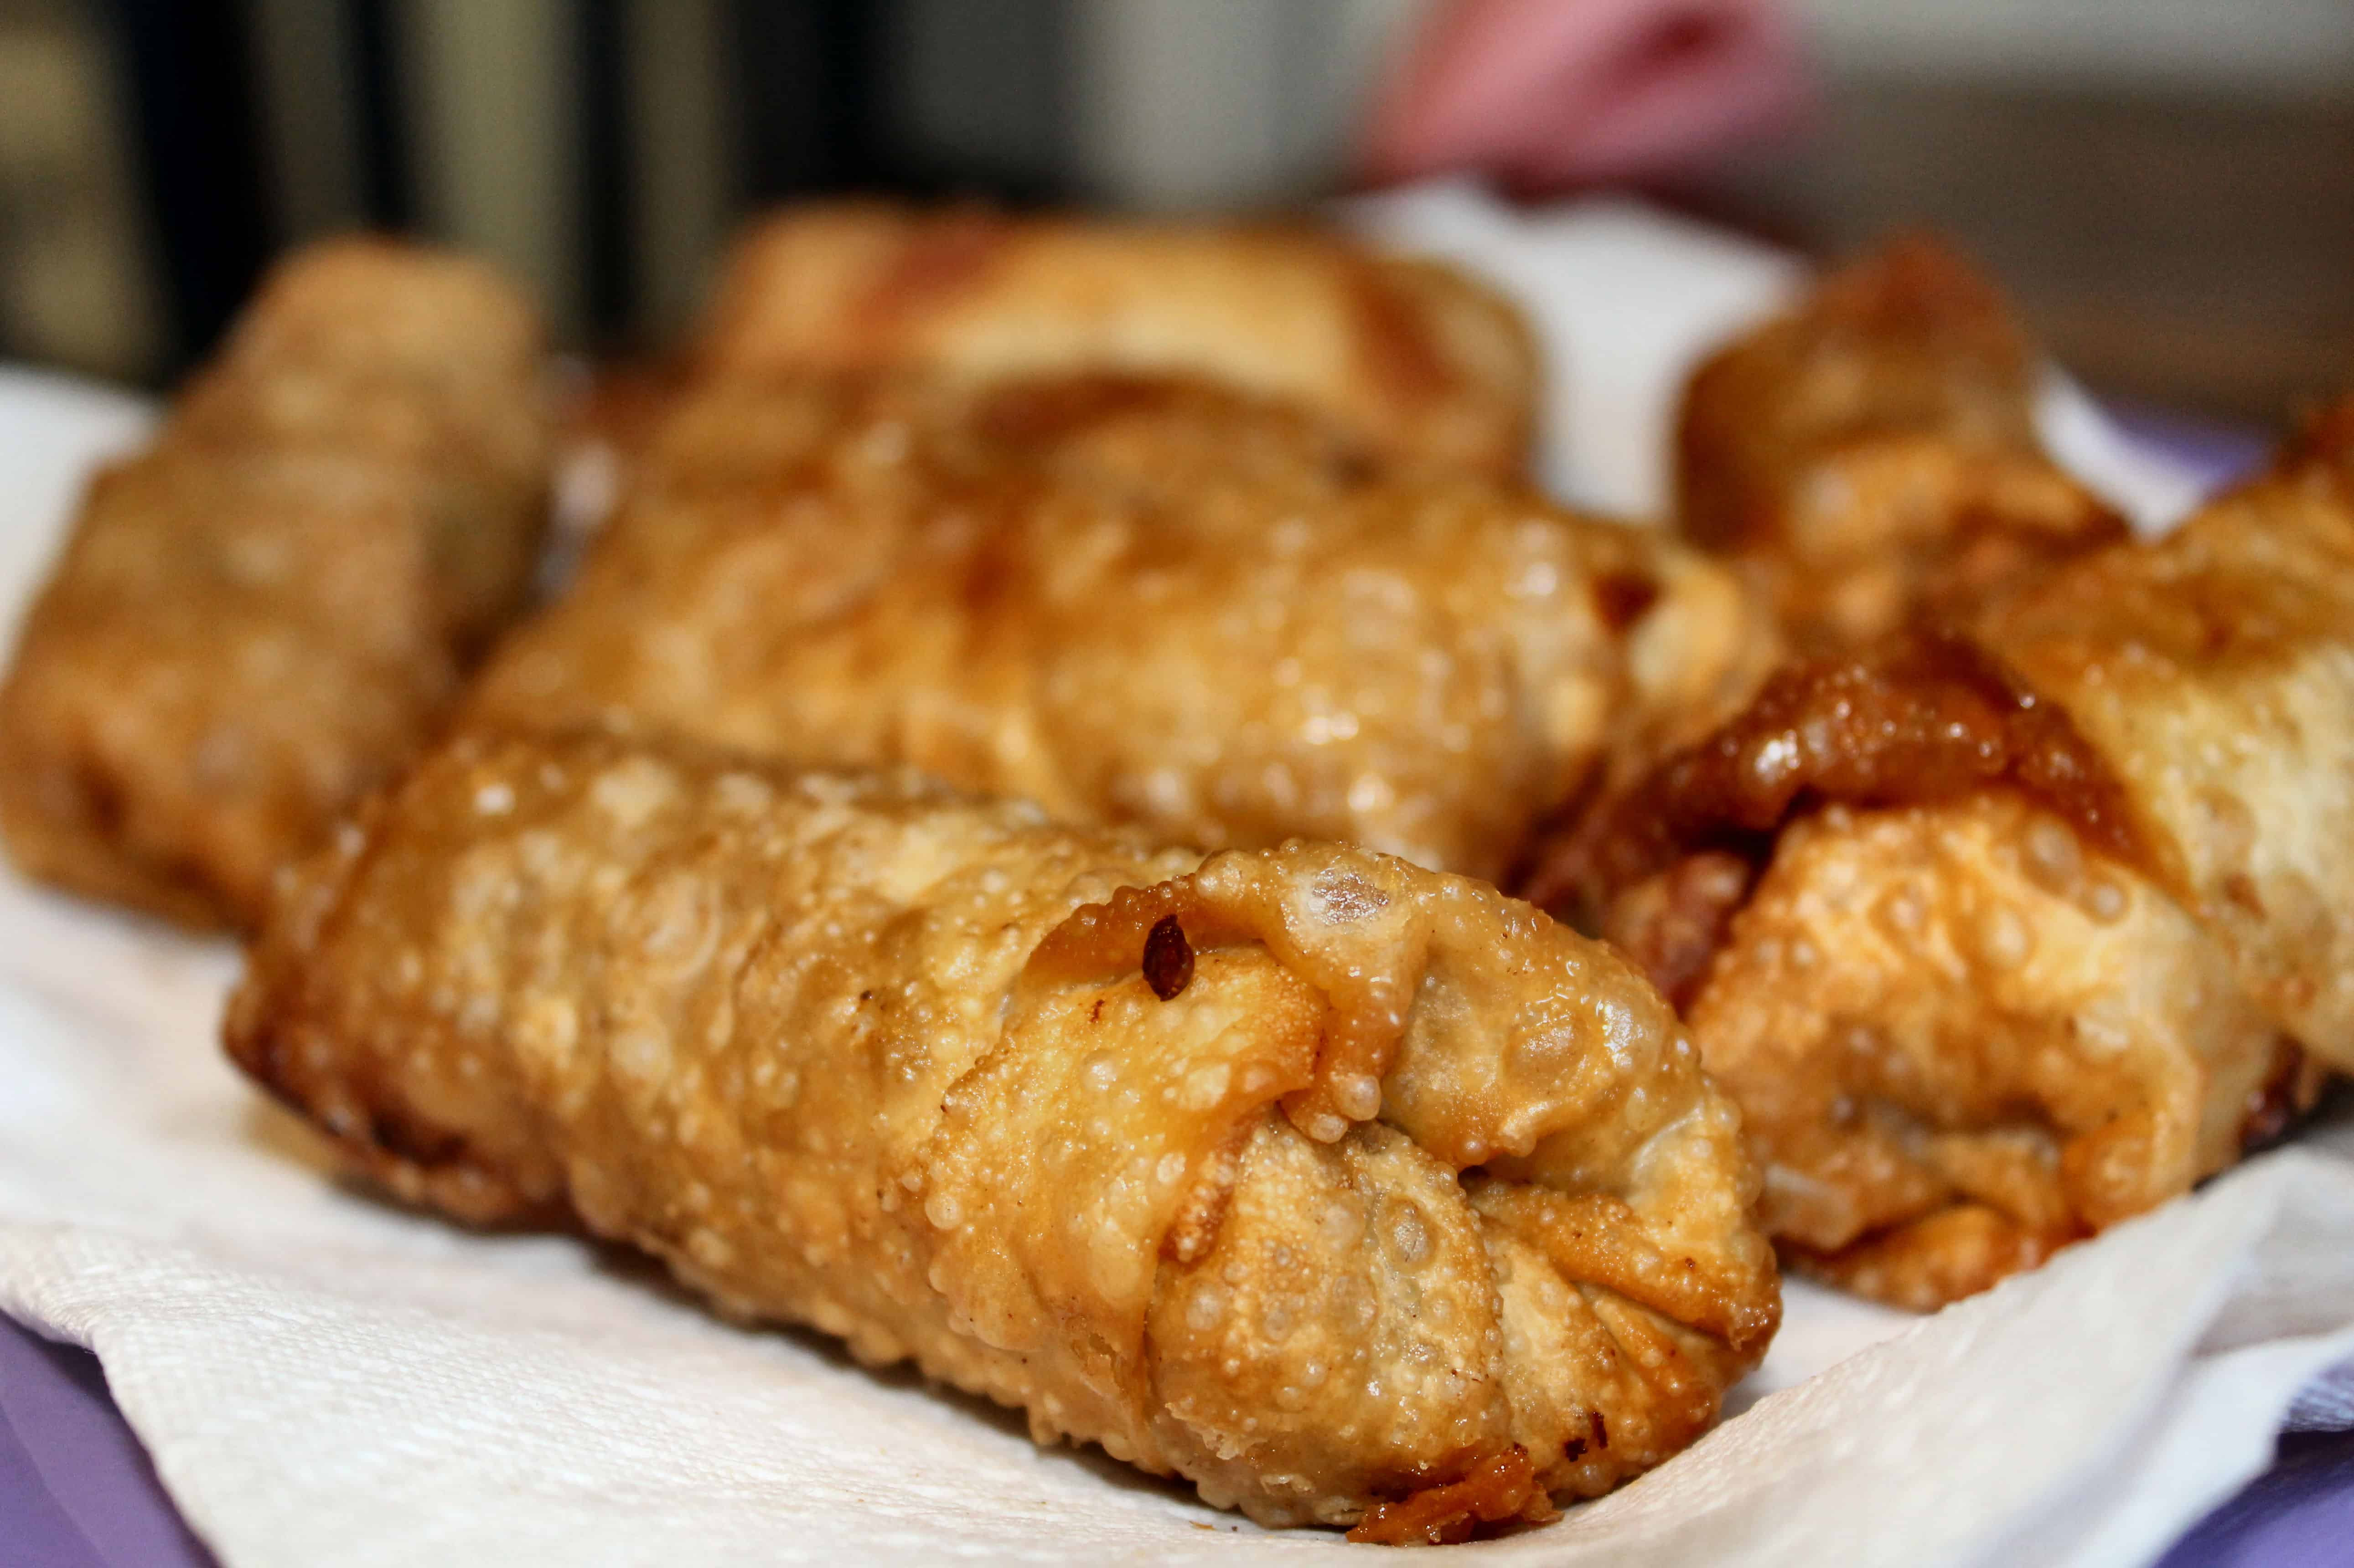 These semi-homemade eggrolls are as easy as they are tasty! YUM YUM!